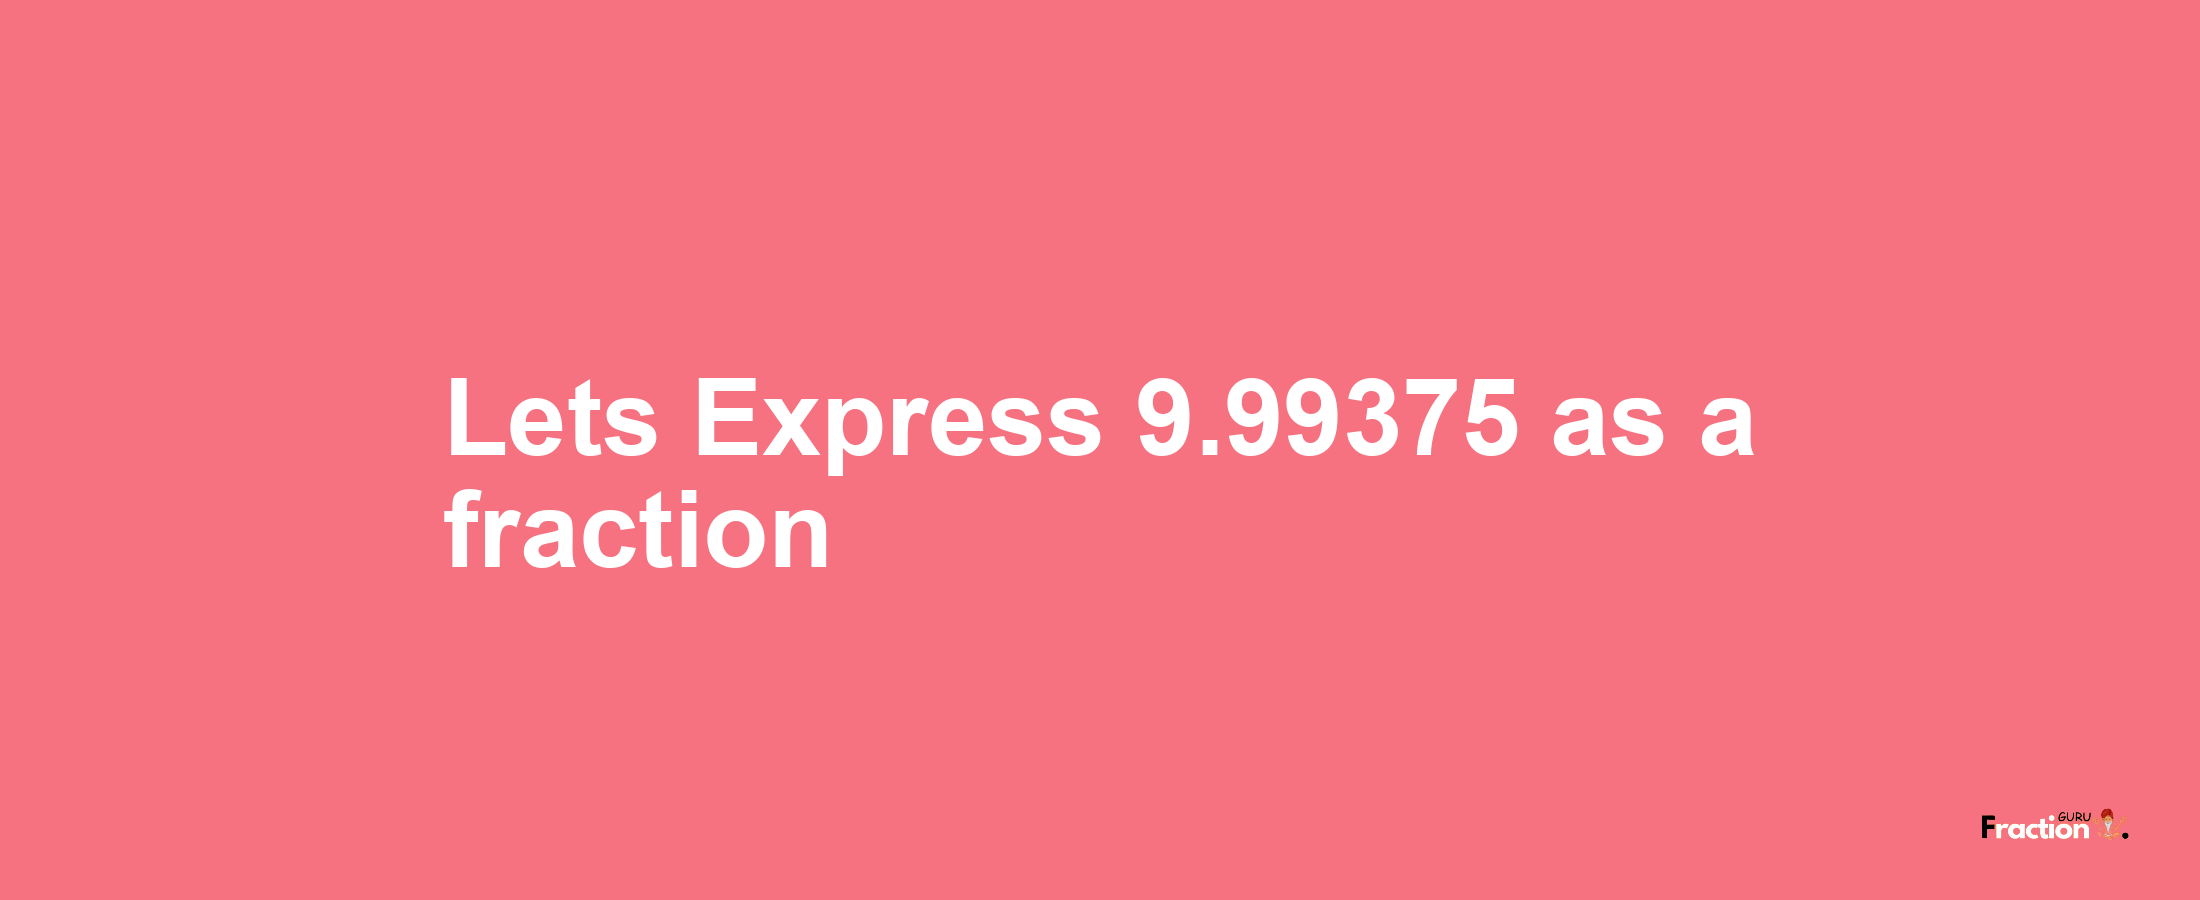 Lets Express 9.99375 as afraction